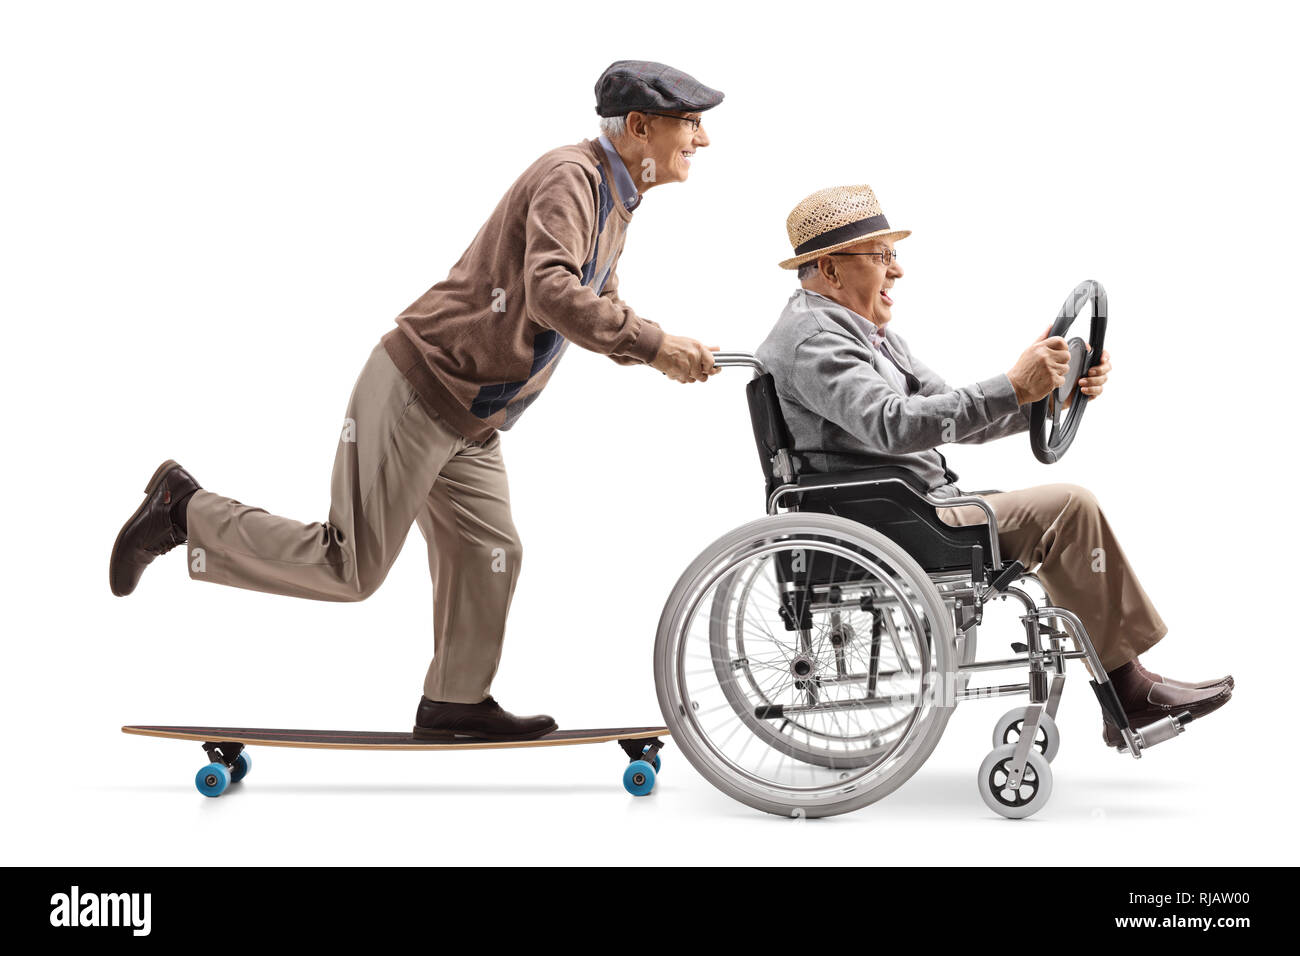 Full length profile shot of an elderly man riding a longboard and pushing a man holding a steering wheel and sitting in a wheelchair isolated on white Stock Photo